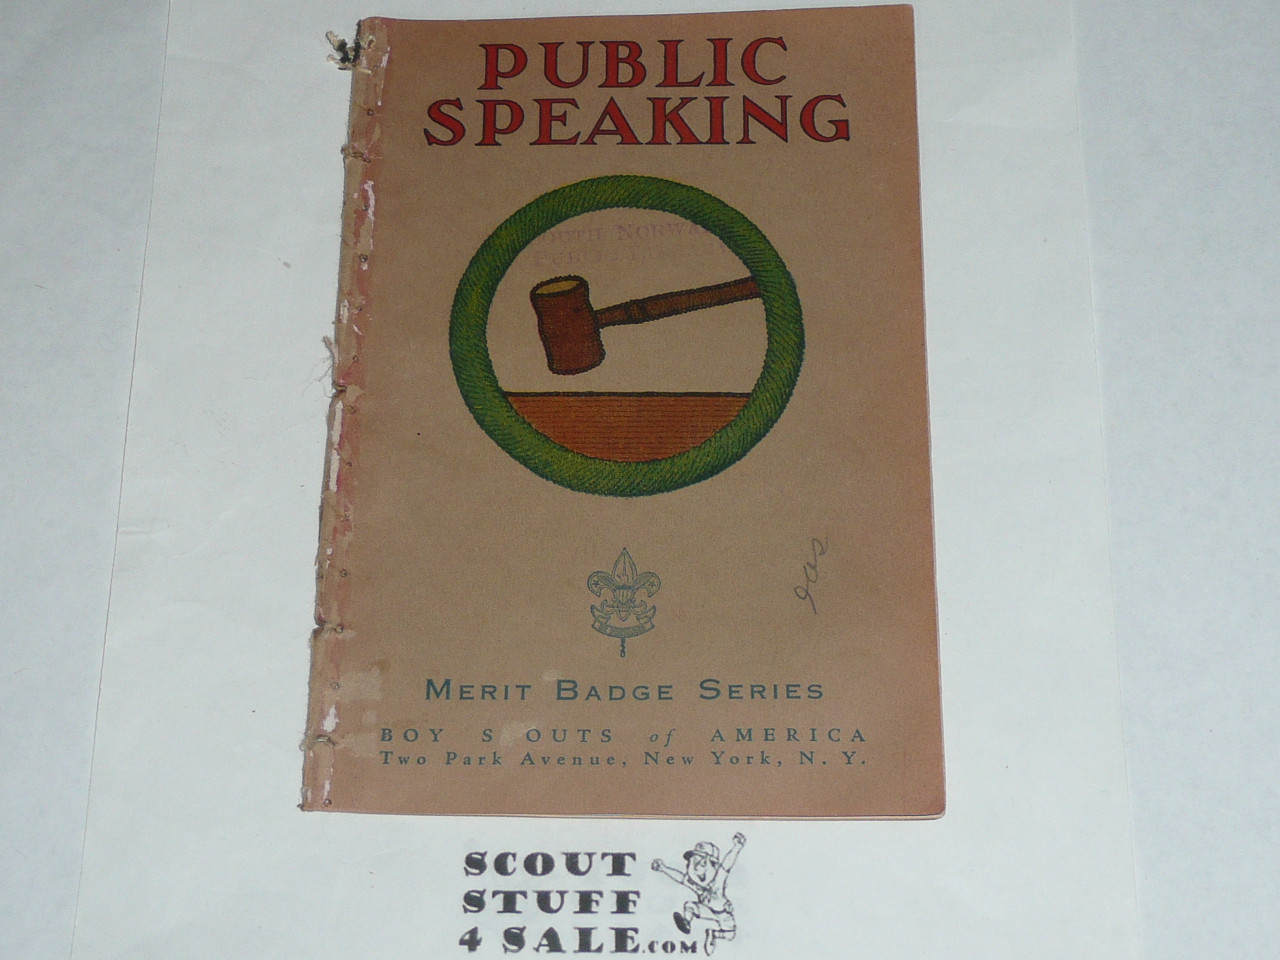 Public Speaking Merit Badge Pamphlet, Type 3, Tan Cover, 4-39 Printing, some spine wear from library binding but book is solid